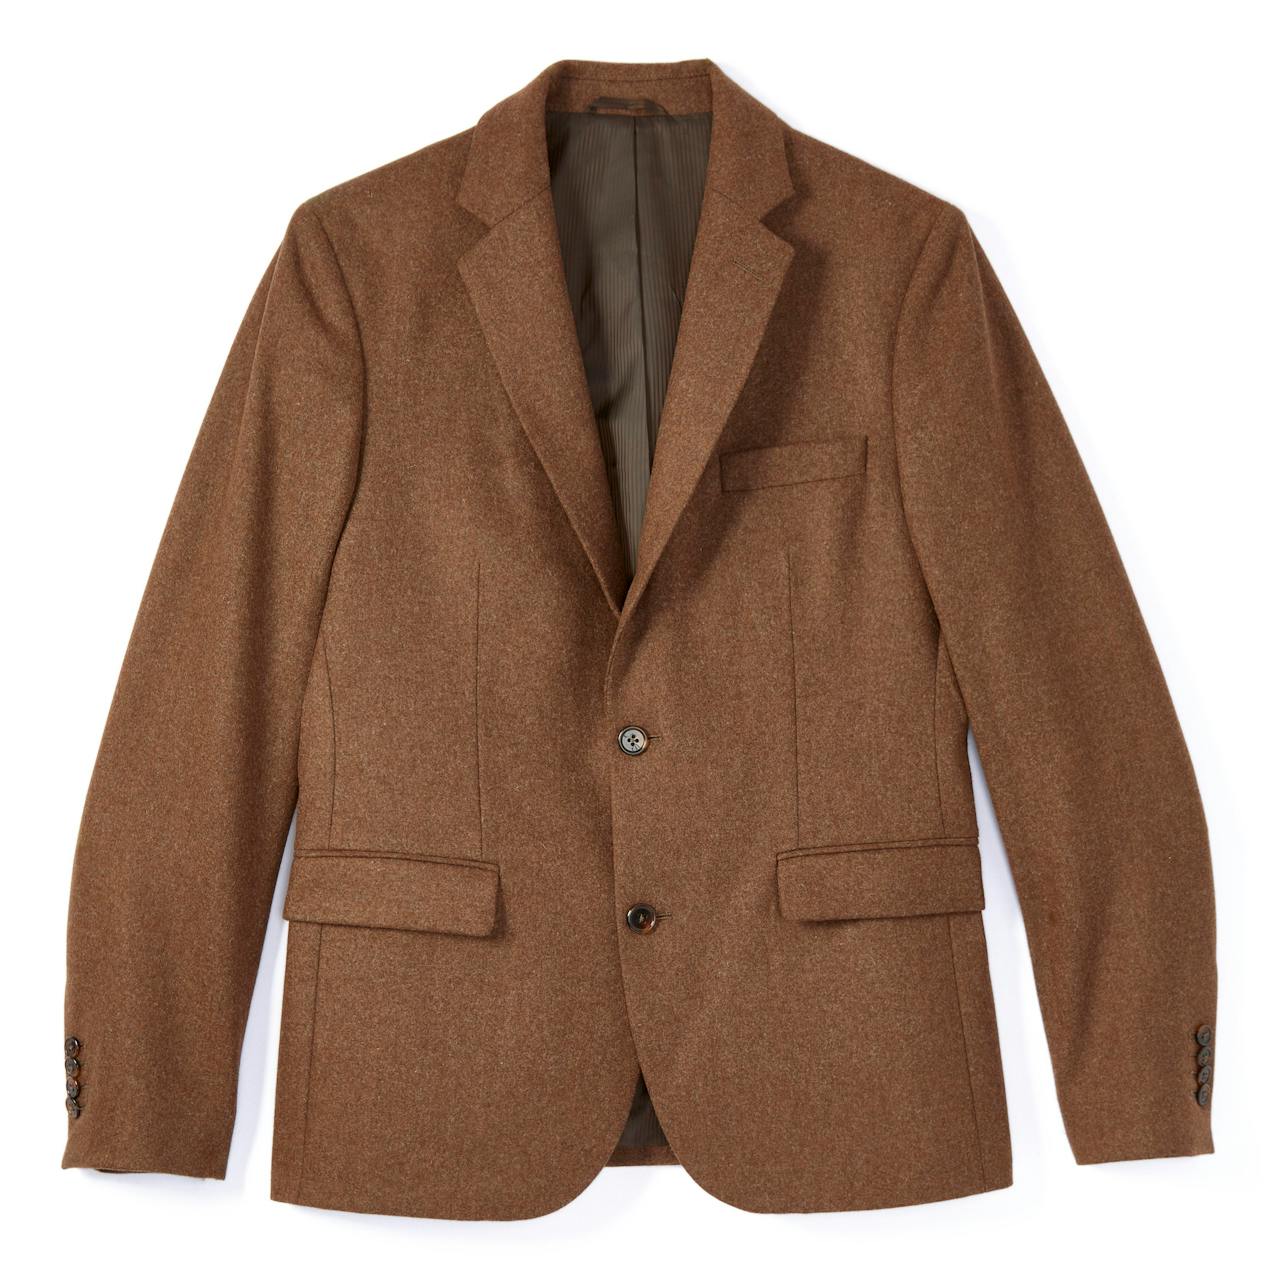 Essential Wool Blend Blazer, Single Breasted Long Sleeves Fully Lined -  Chadwicks Timeless Classics